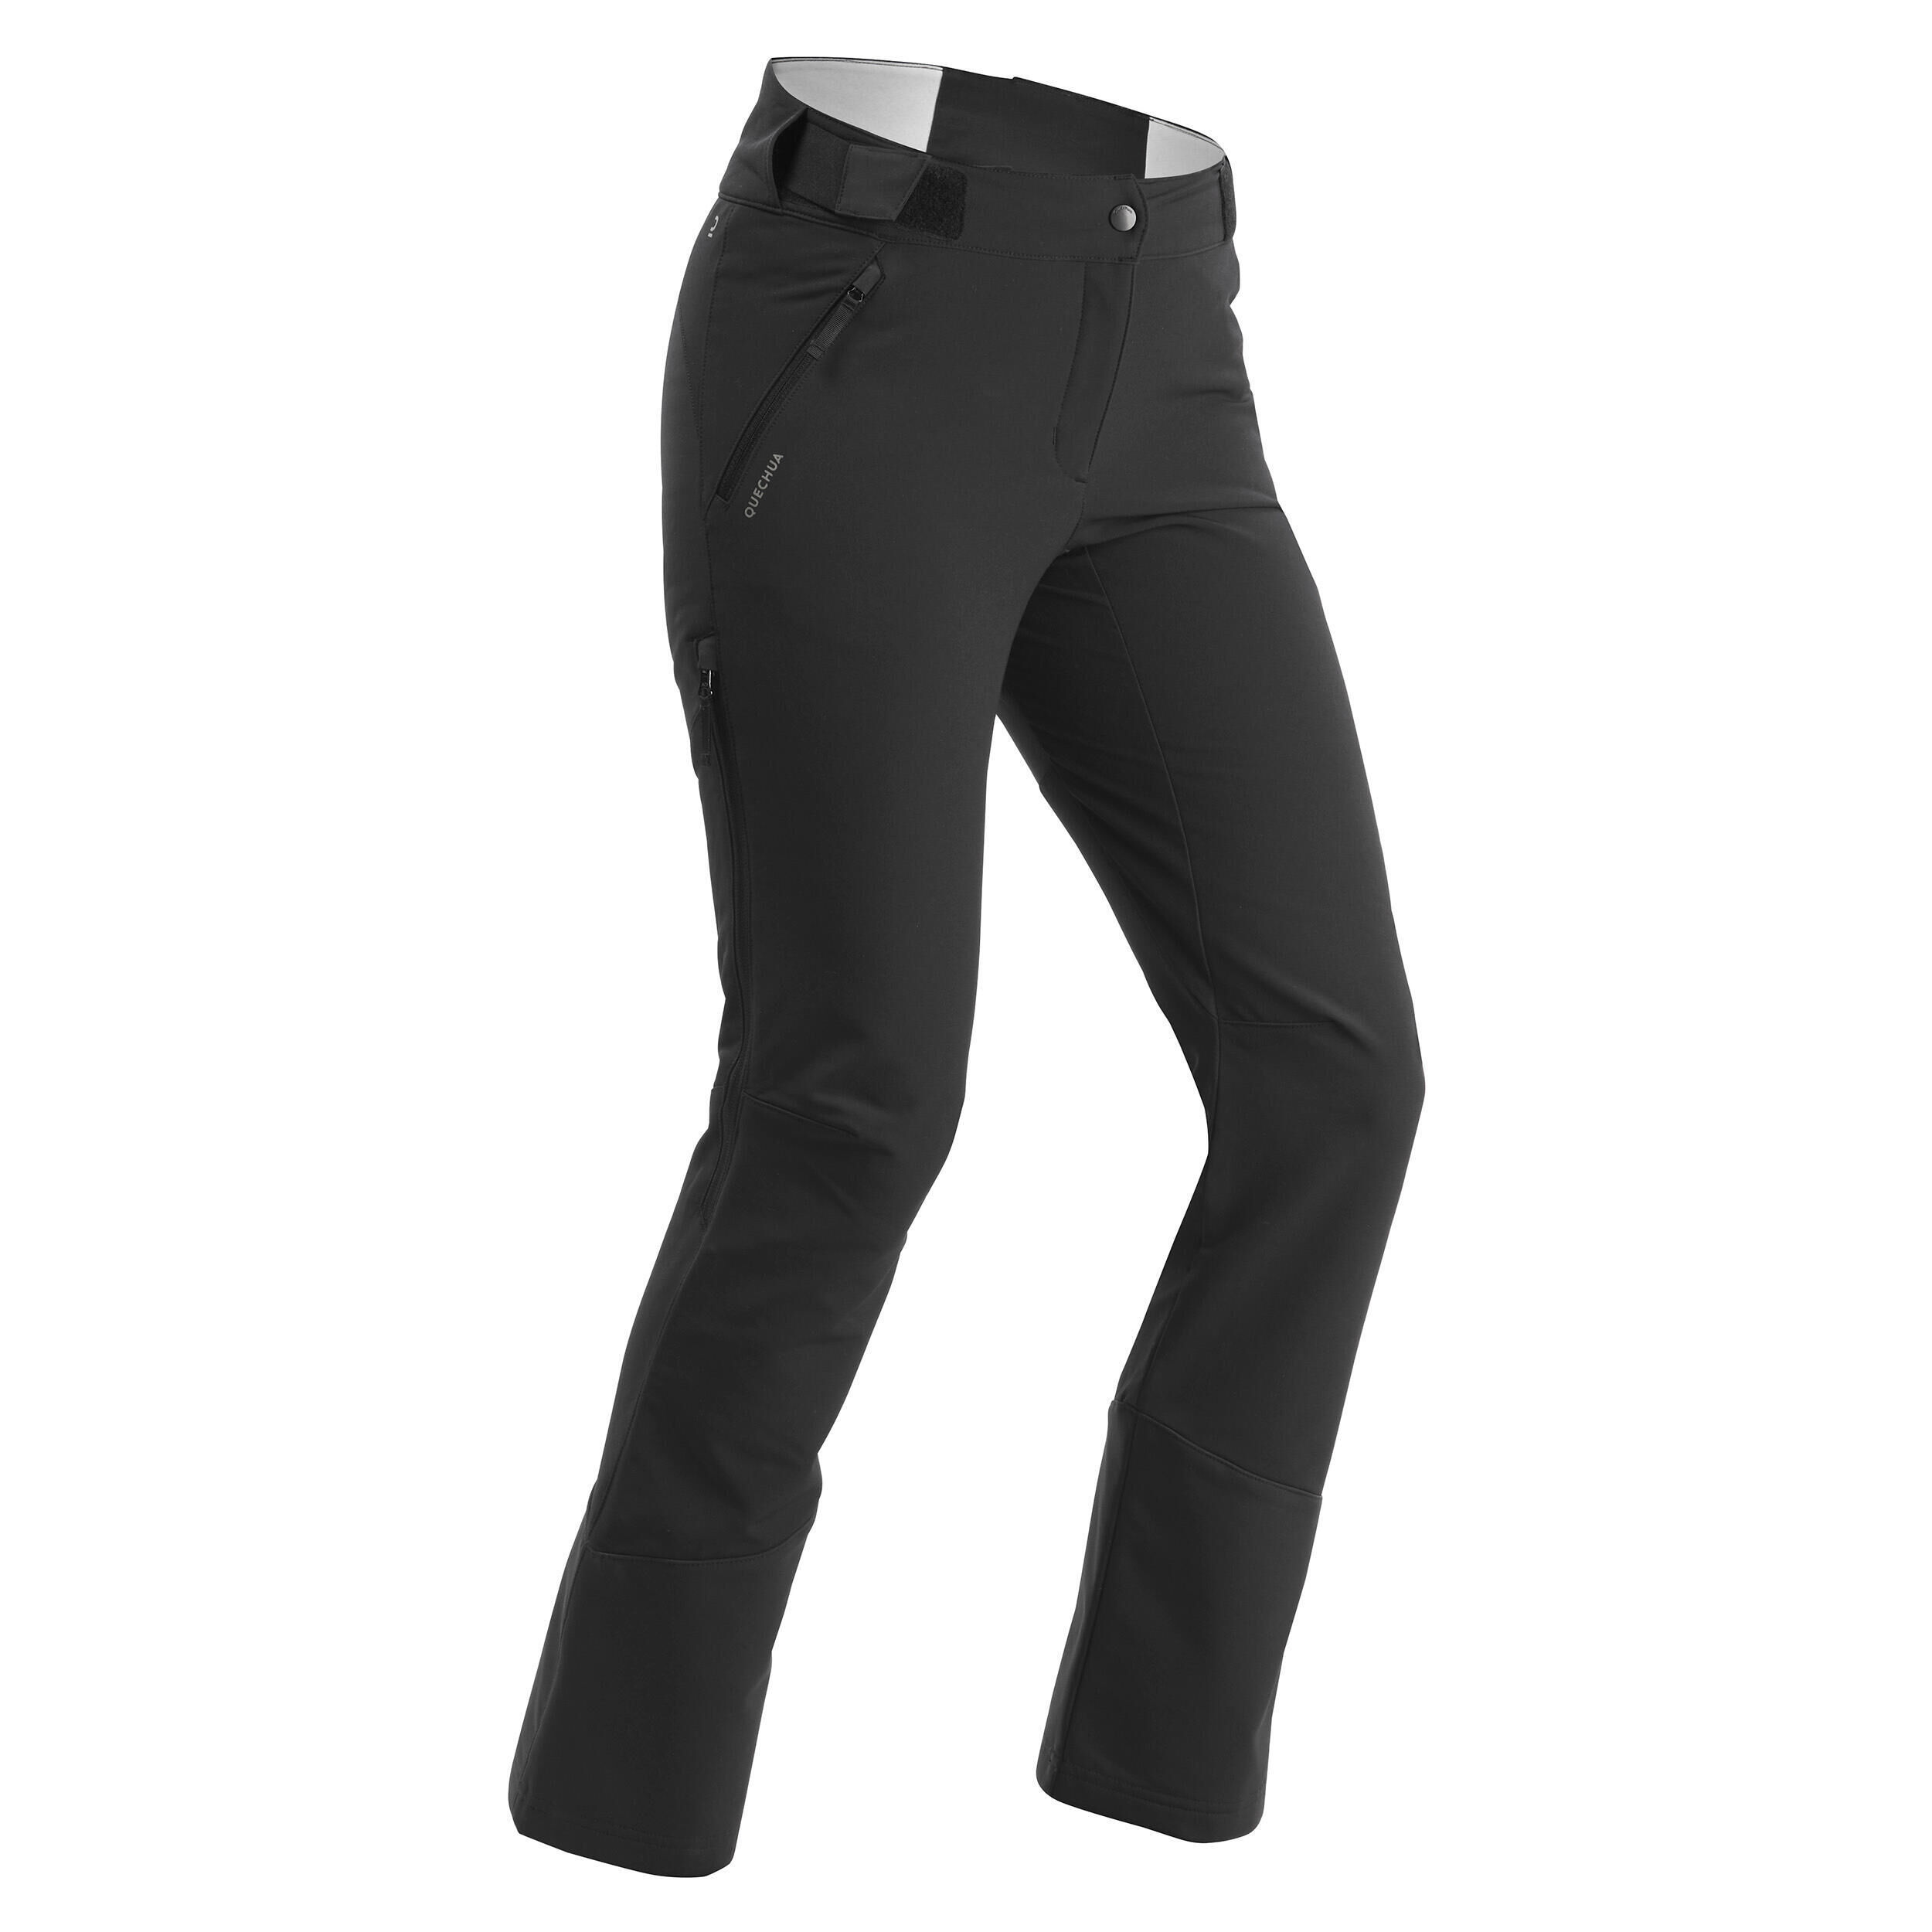 QUECHUA Refurbished Womens warm water-repellent ventilated hiking trousers - A Grade